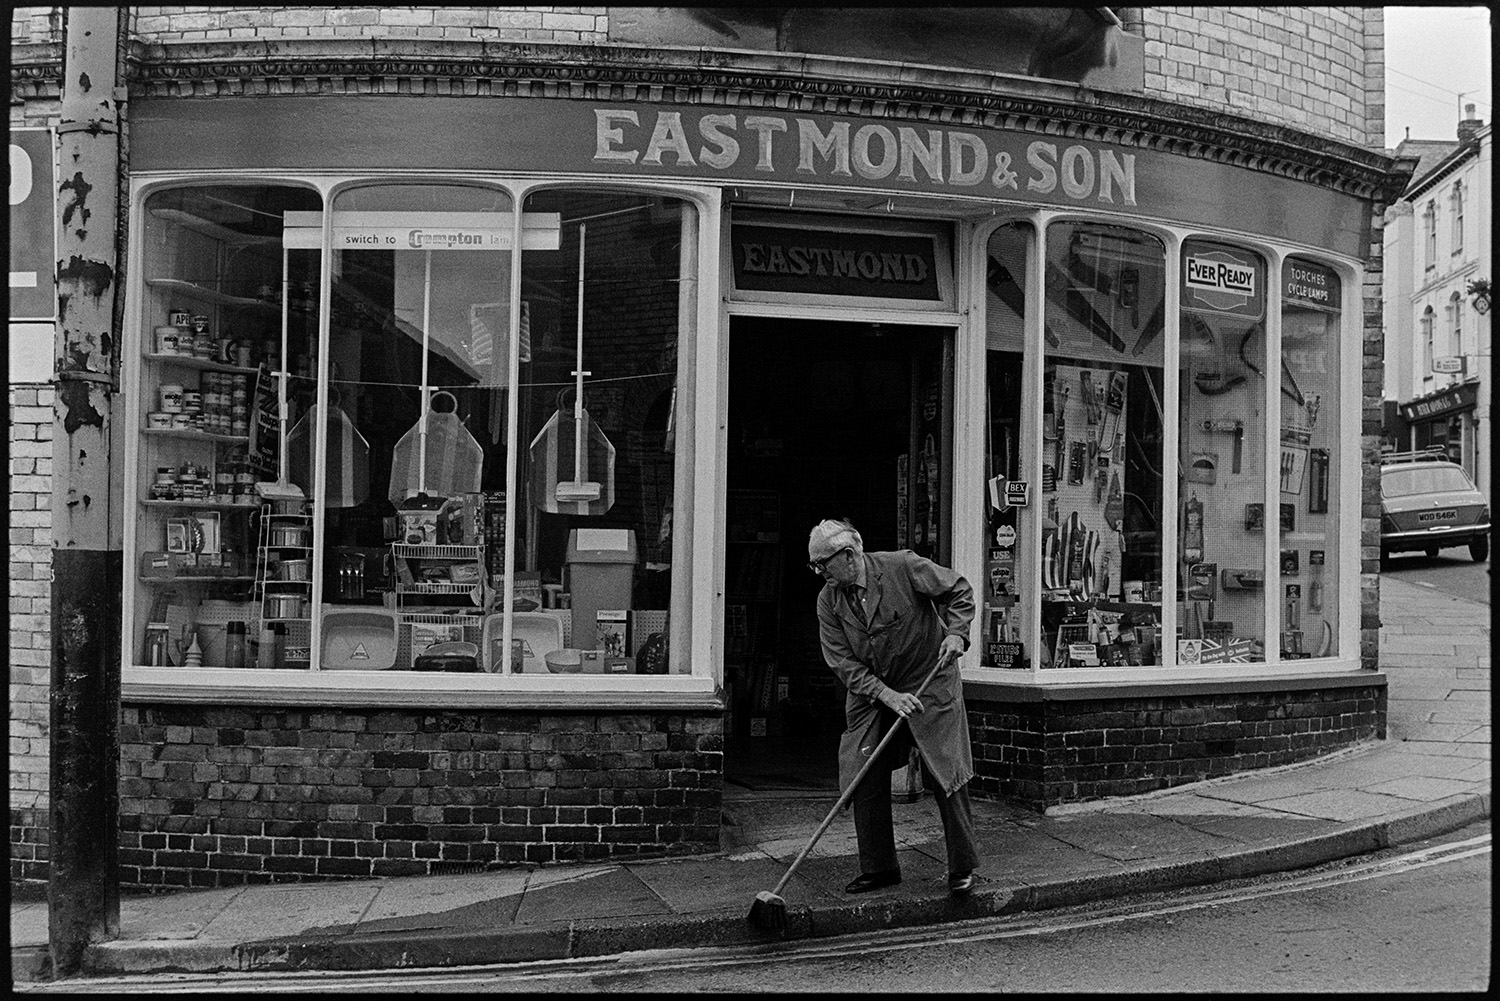 Front of Ironmongers shop, proprietor sweeping pavement. 
[The shop front of Eastmond & Son Ironmongers shop in Torrington. Mr Eastmond is using a brush to sweep the pavement outside the shop. Various goods are on display in the shop window, including saws. washing up bowls and saucepans.]